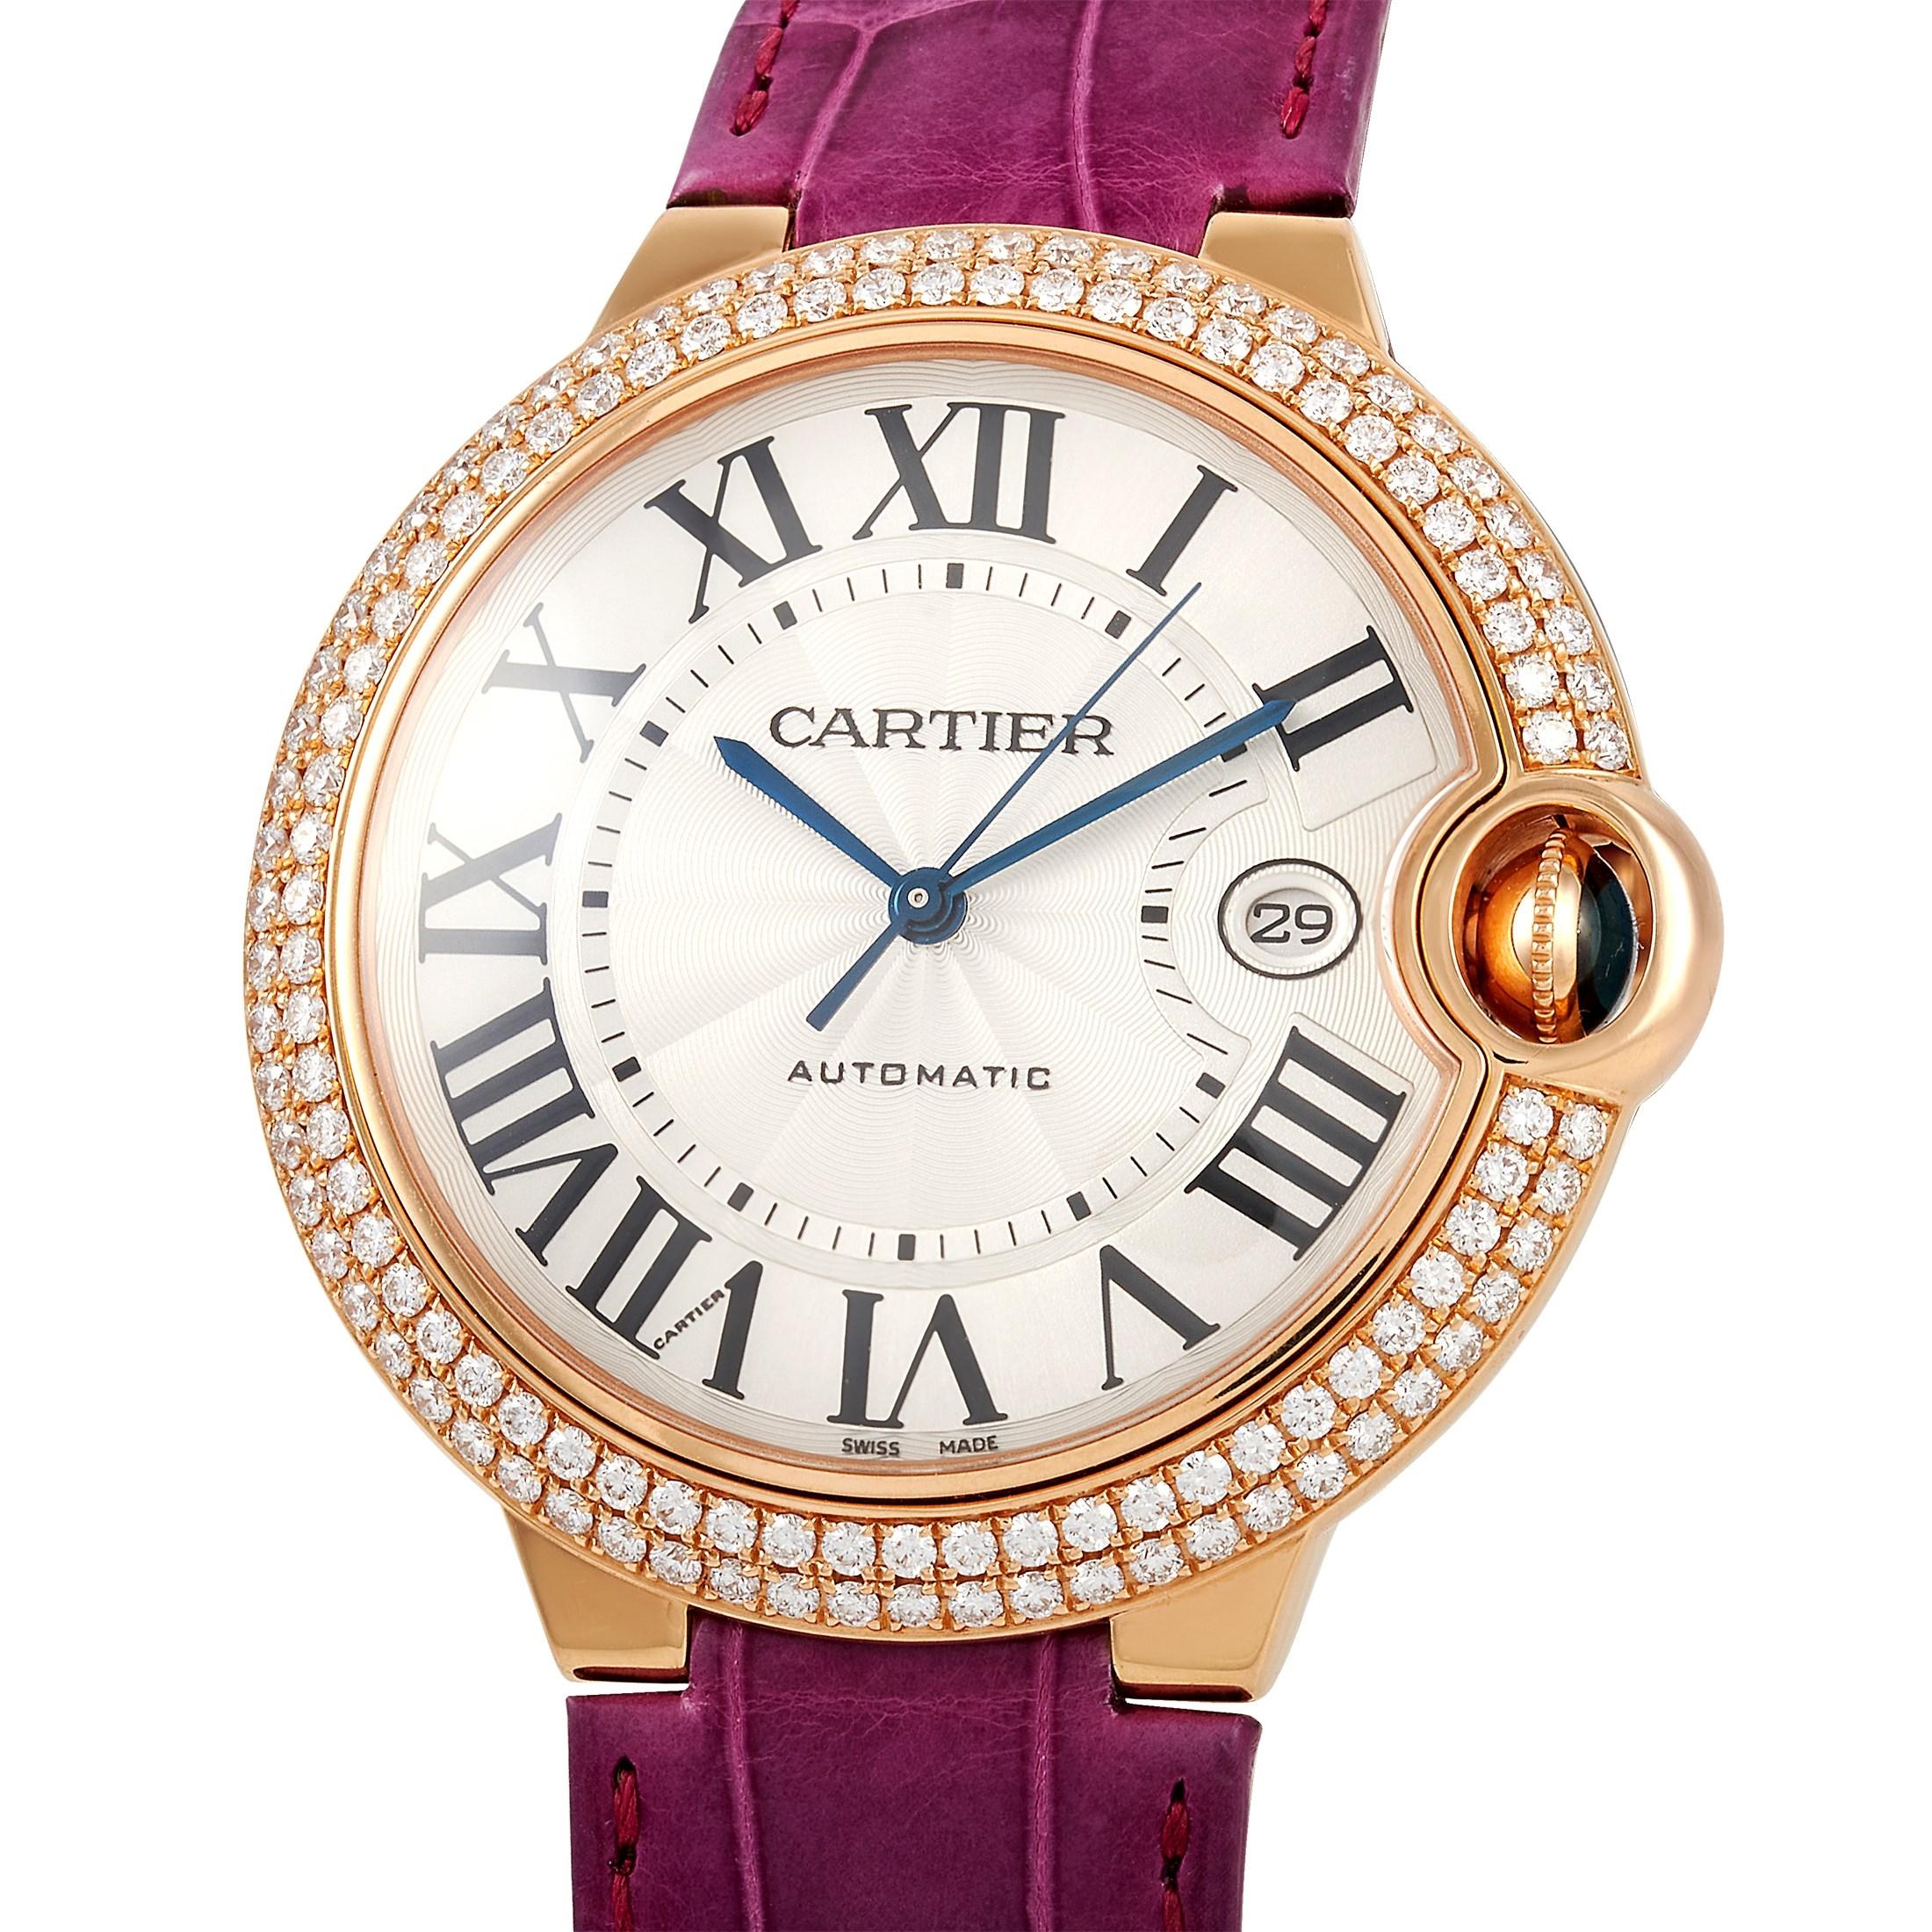 The Cartier Ballon Bleu Watch, reference number WE900851, is a sophisticated piece that is perfect for anyone with refined taste. With a fixed bezel featuring 2 rows of glittering, round-cut diamonds, it’s a luxury piece that is sure to attract